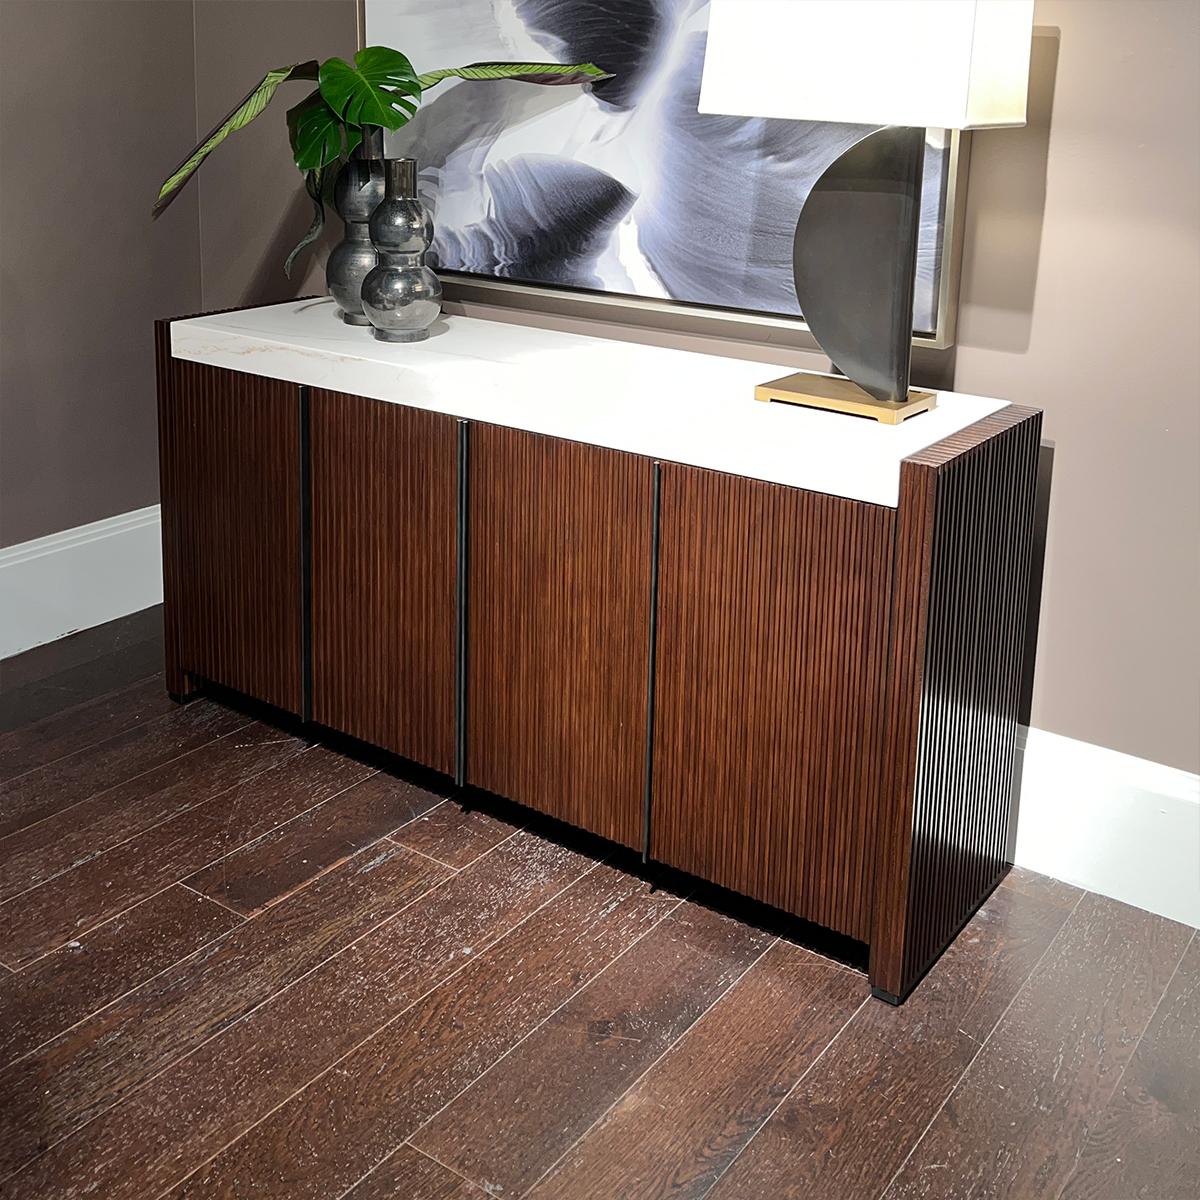 Featuring a rhythmic reeded pattern in warm brown finish, a marble top and brass finished hardware. The cabinet creates the perfect combination of organic sophistication and contemporary style.

Dimensions: 72